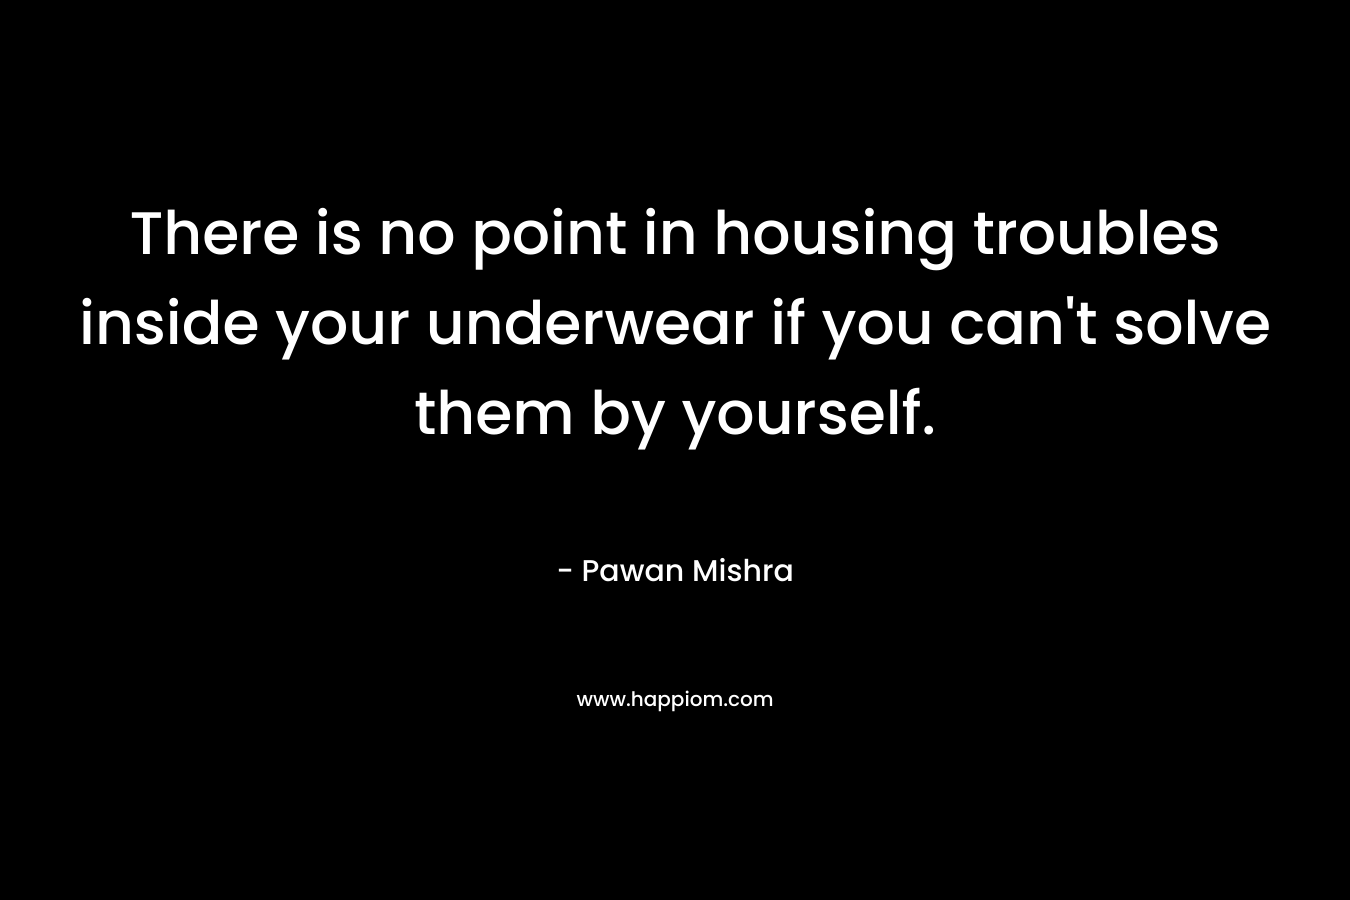 There is no point in housing troubles inside your underwear if you can’t solve them by yourself. – Pawan Mishra